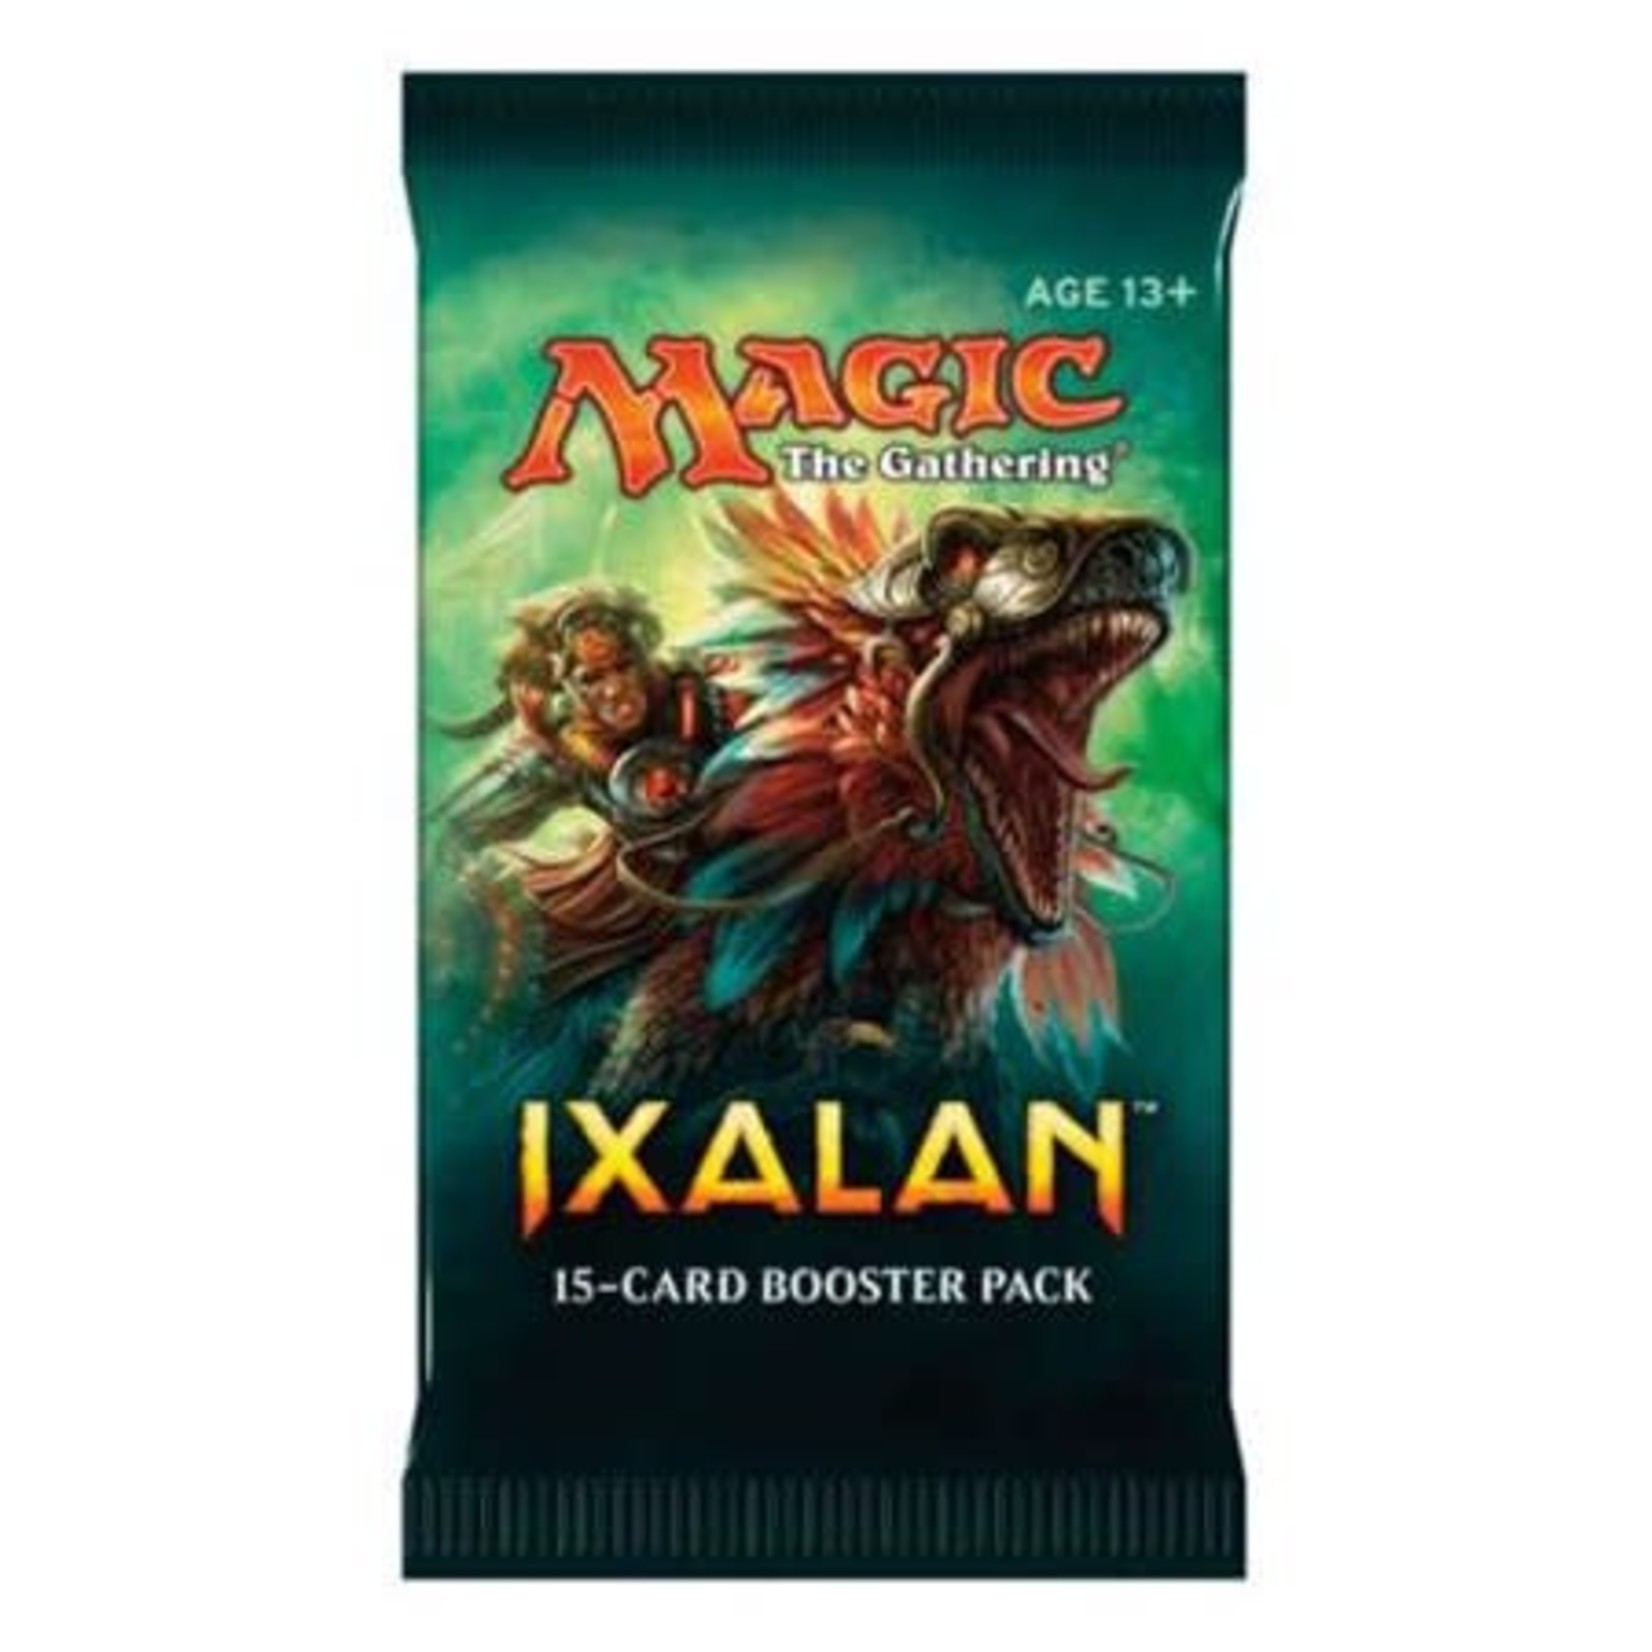 Wizards of the Coast Magic the Gathering Ixalan XLN Booster Pack